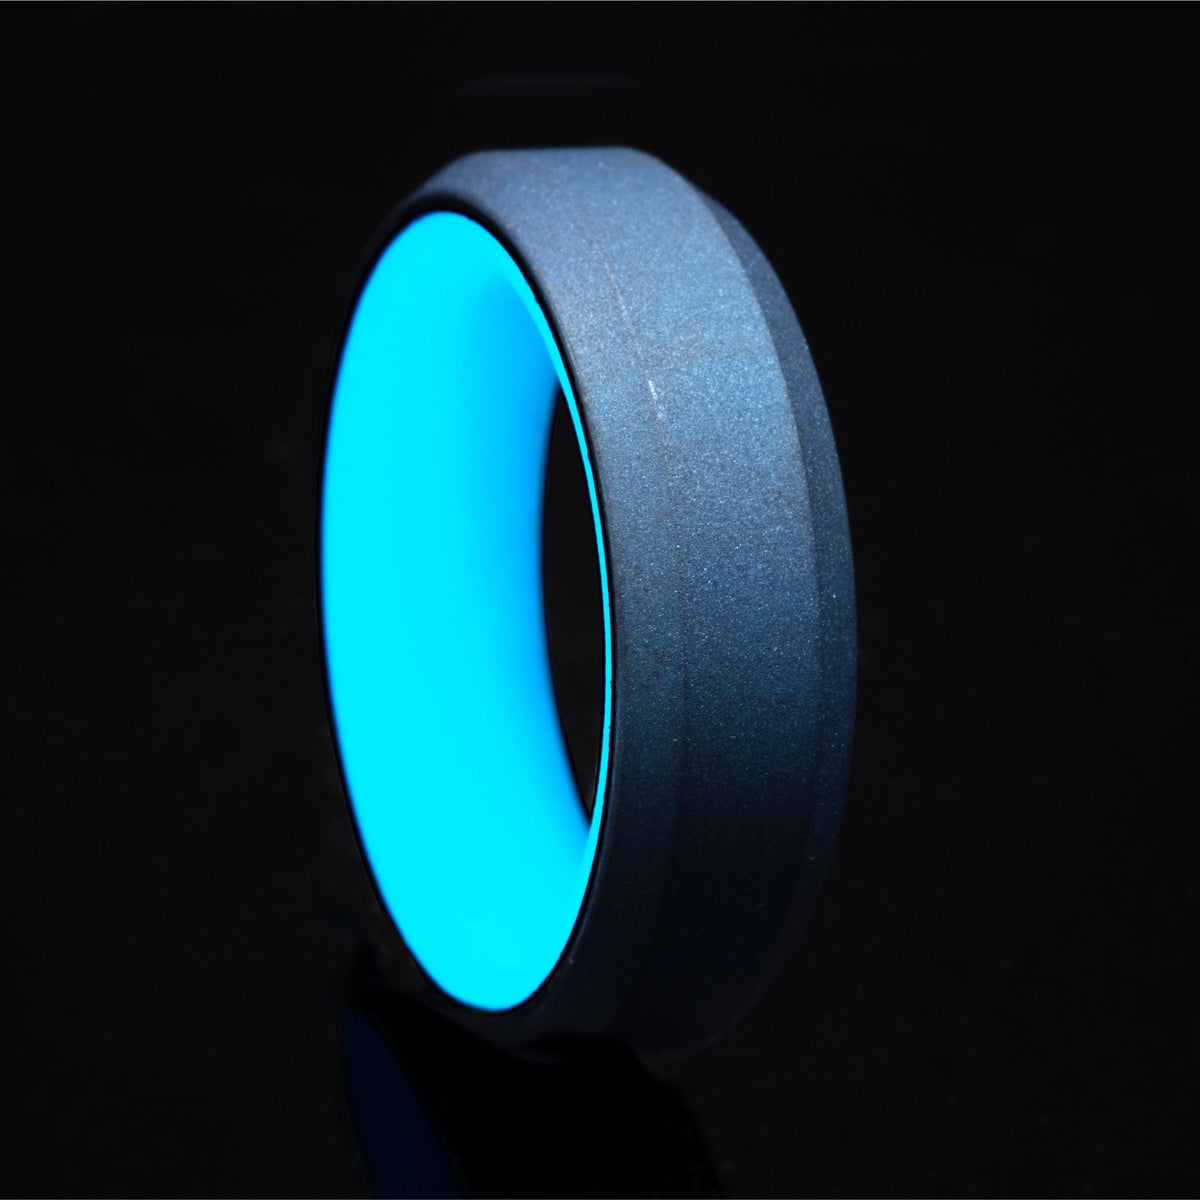 Turquoise glow ring with turquoise anodized titanium exterior and beveled edges.